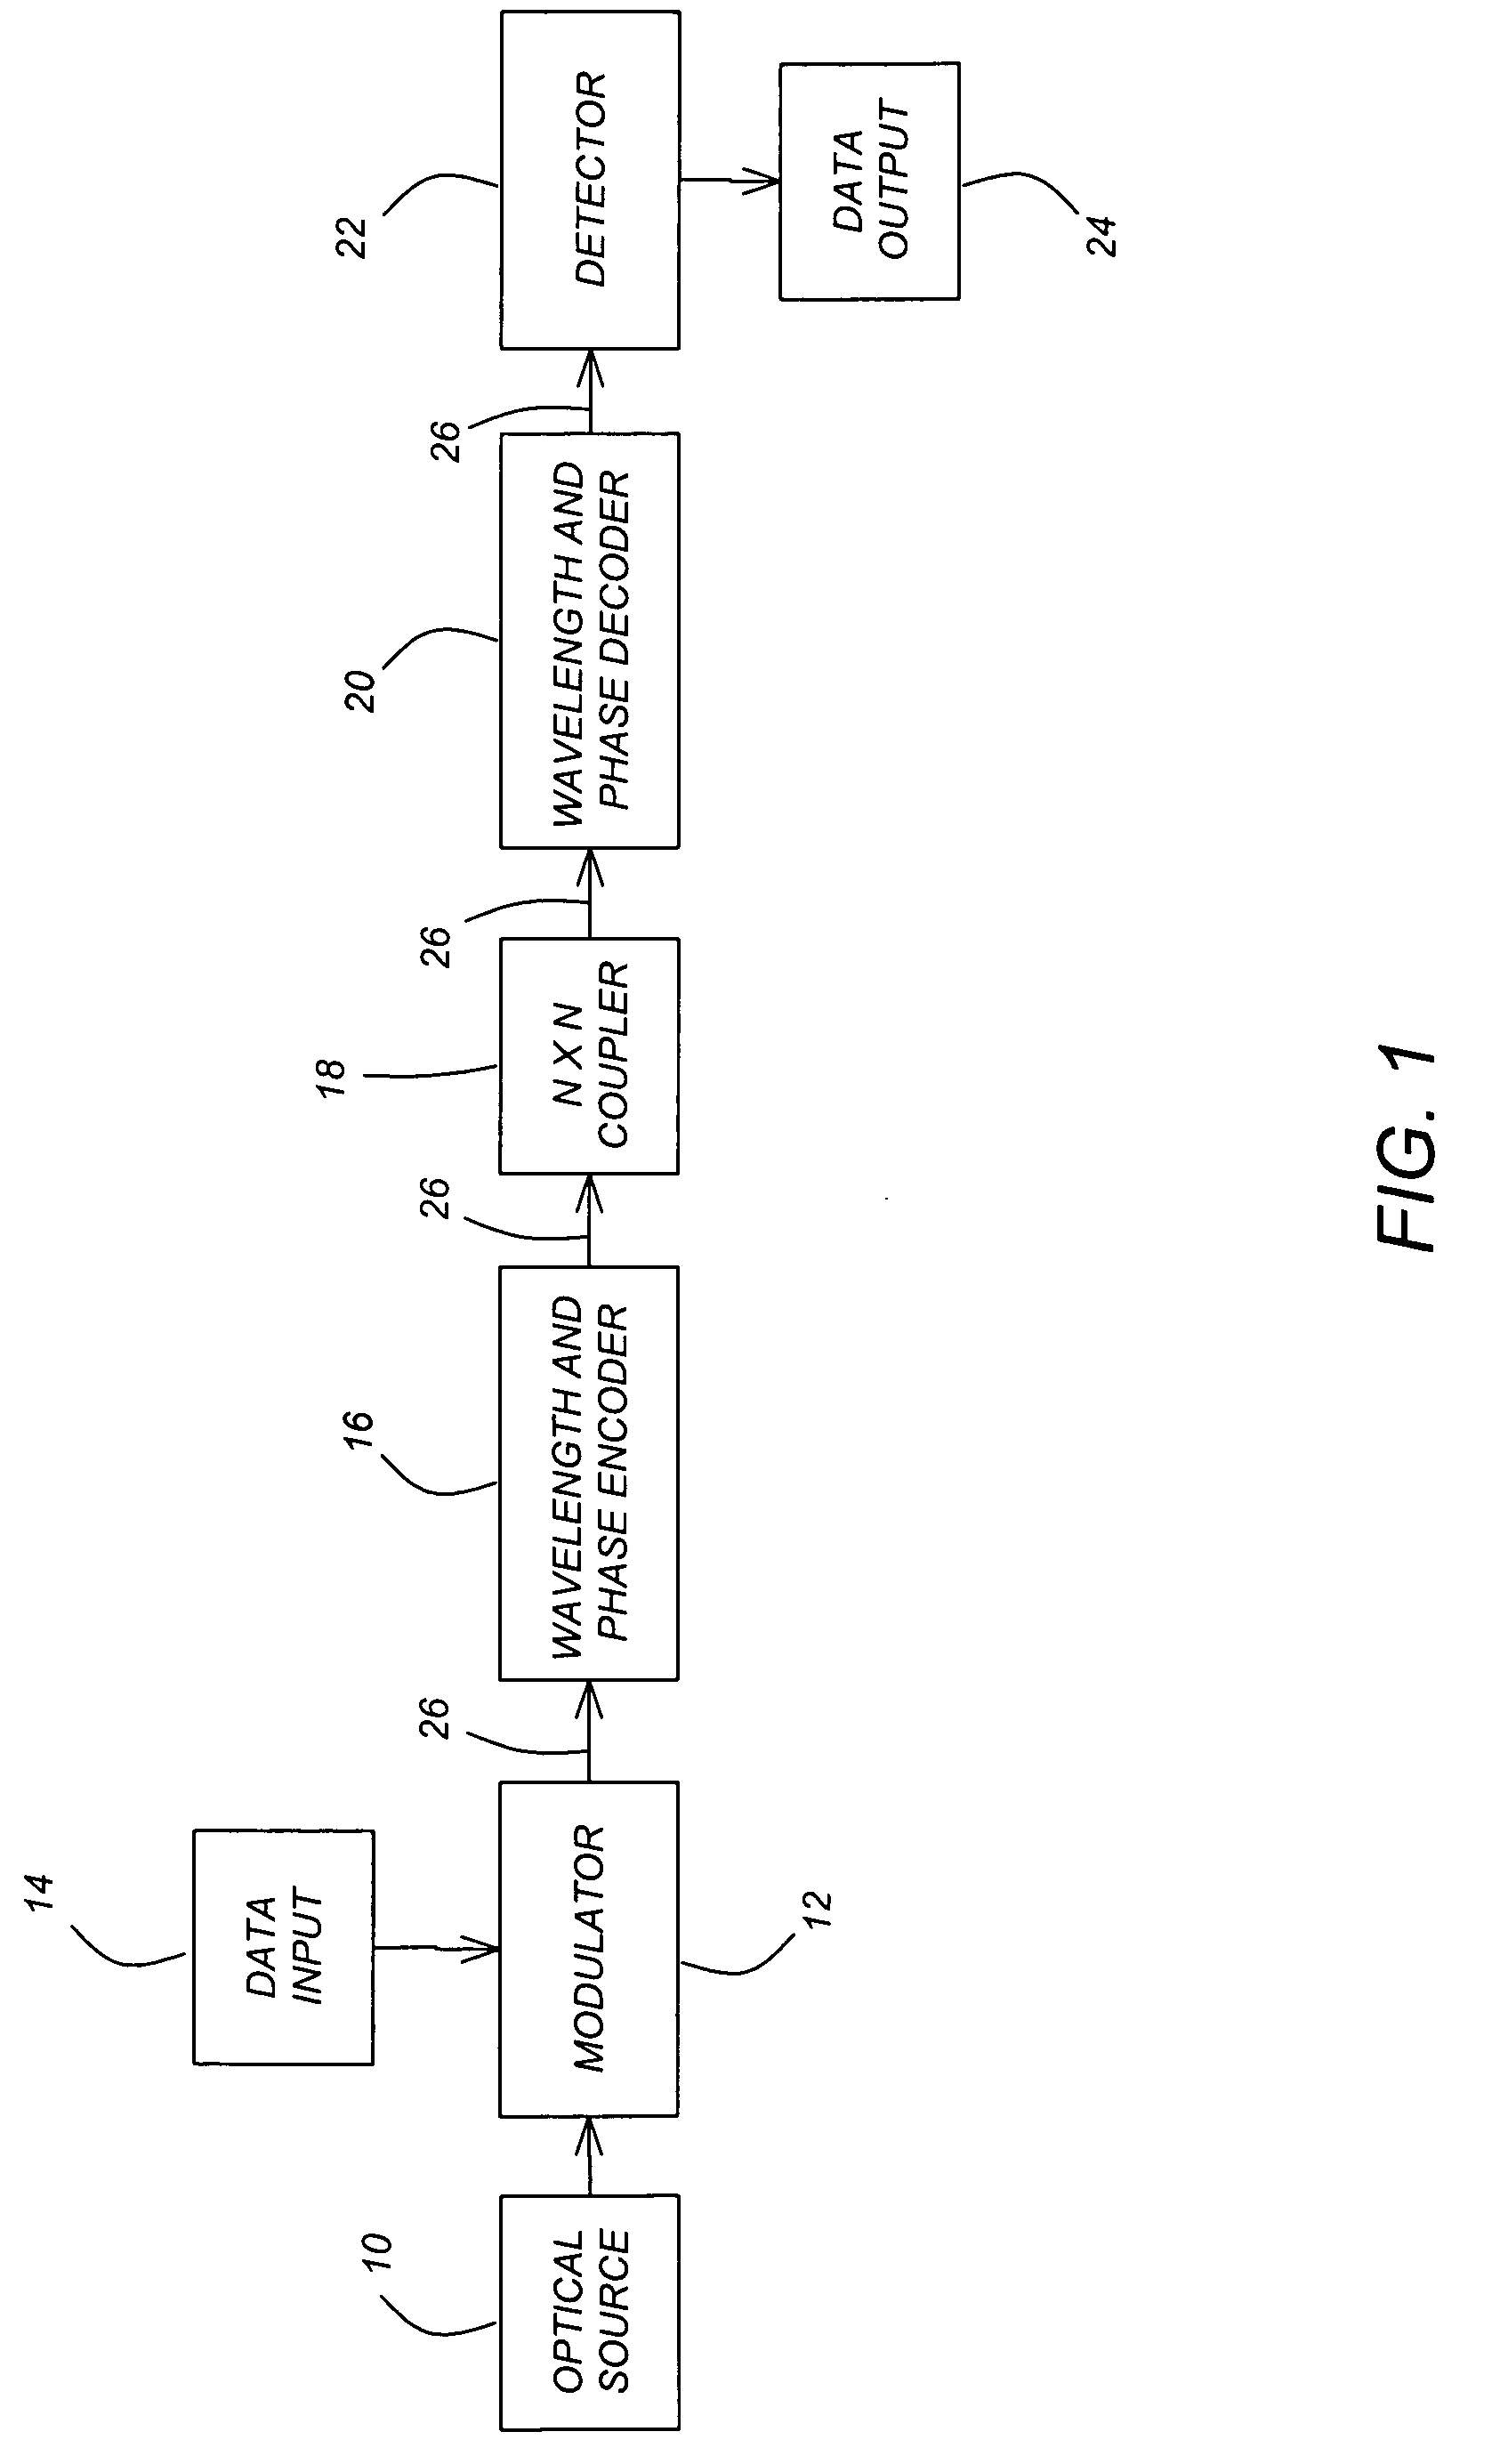 Phase-encoded optical code division multiple access